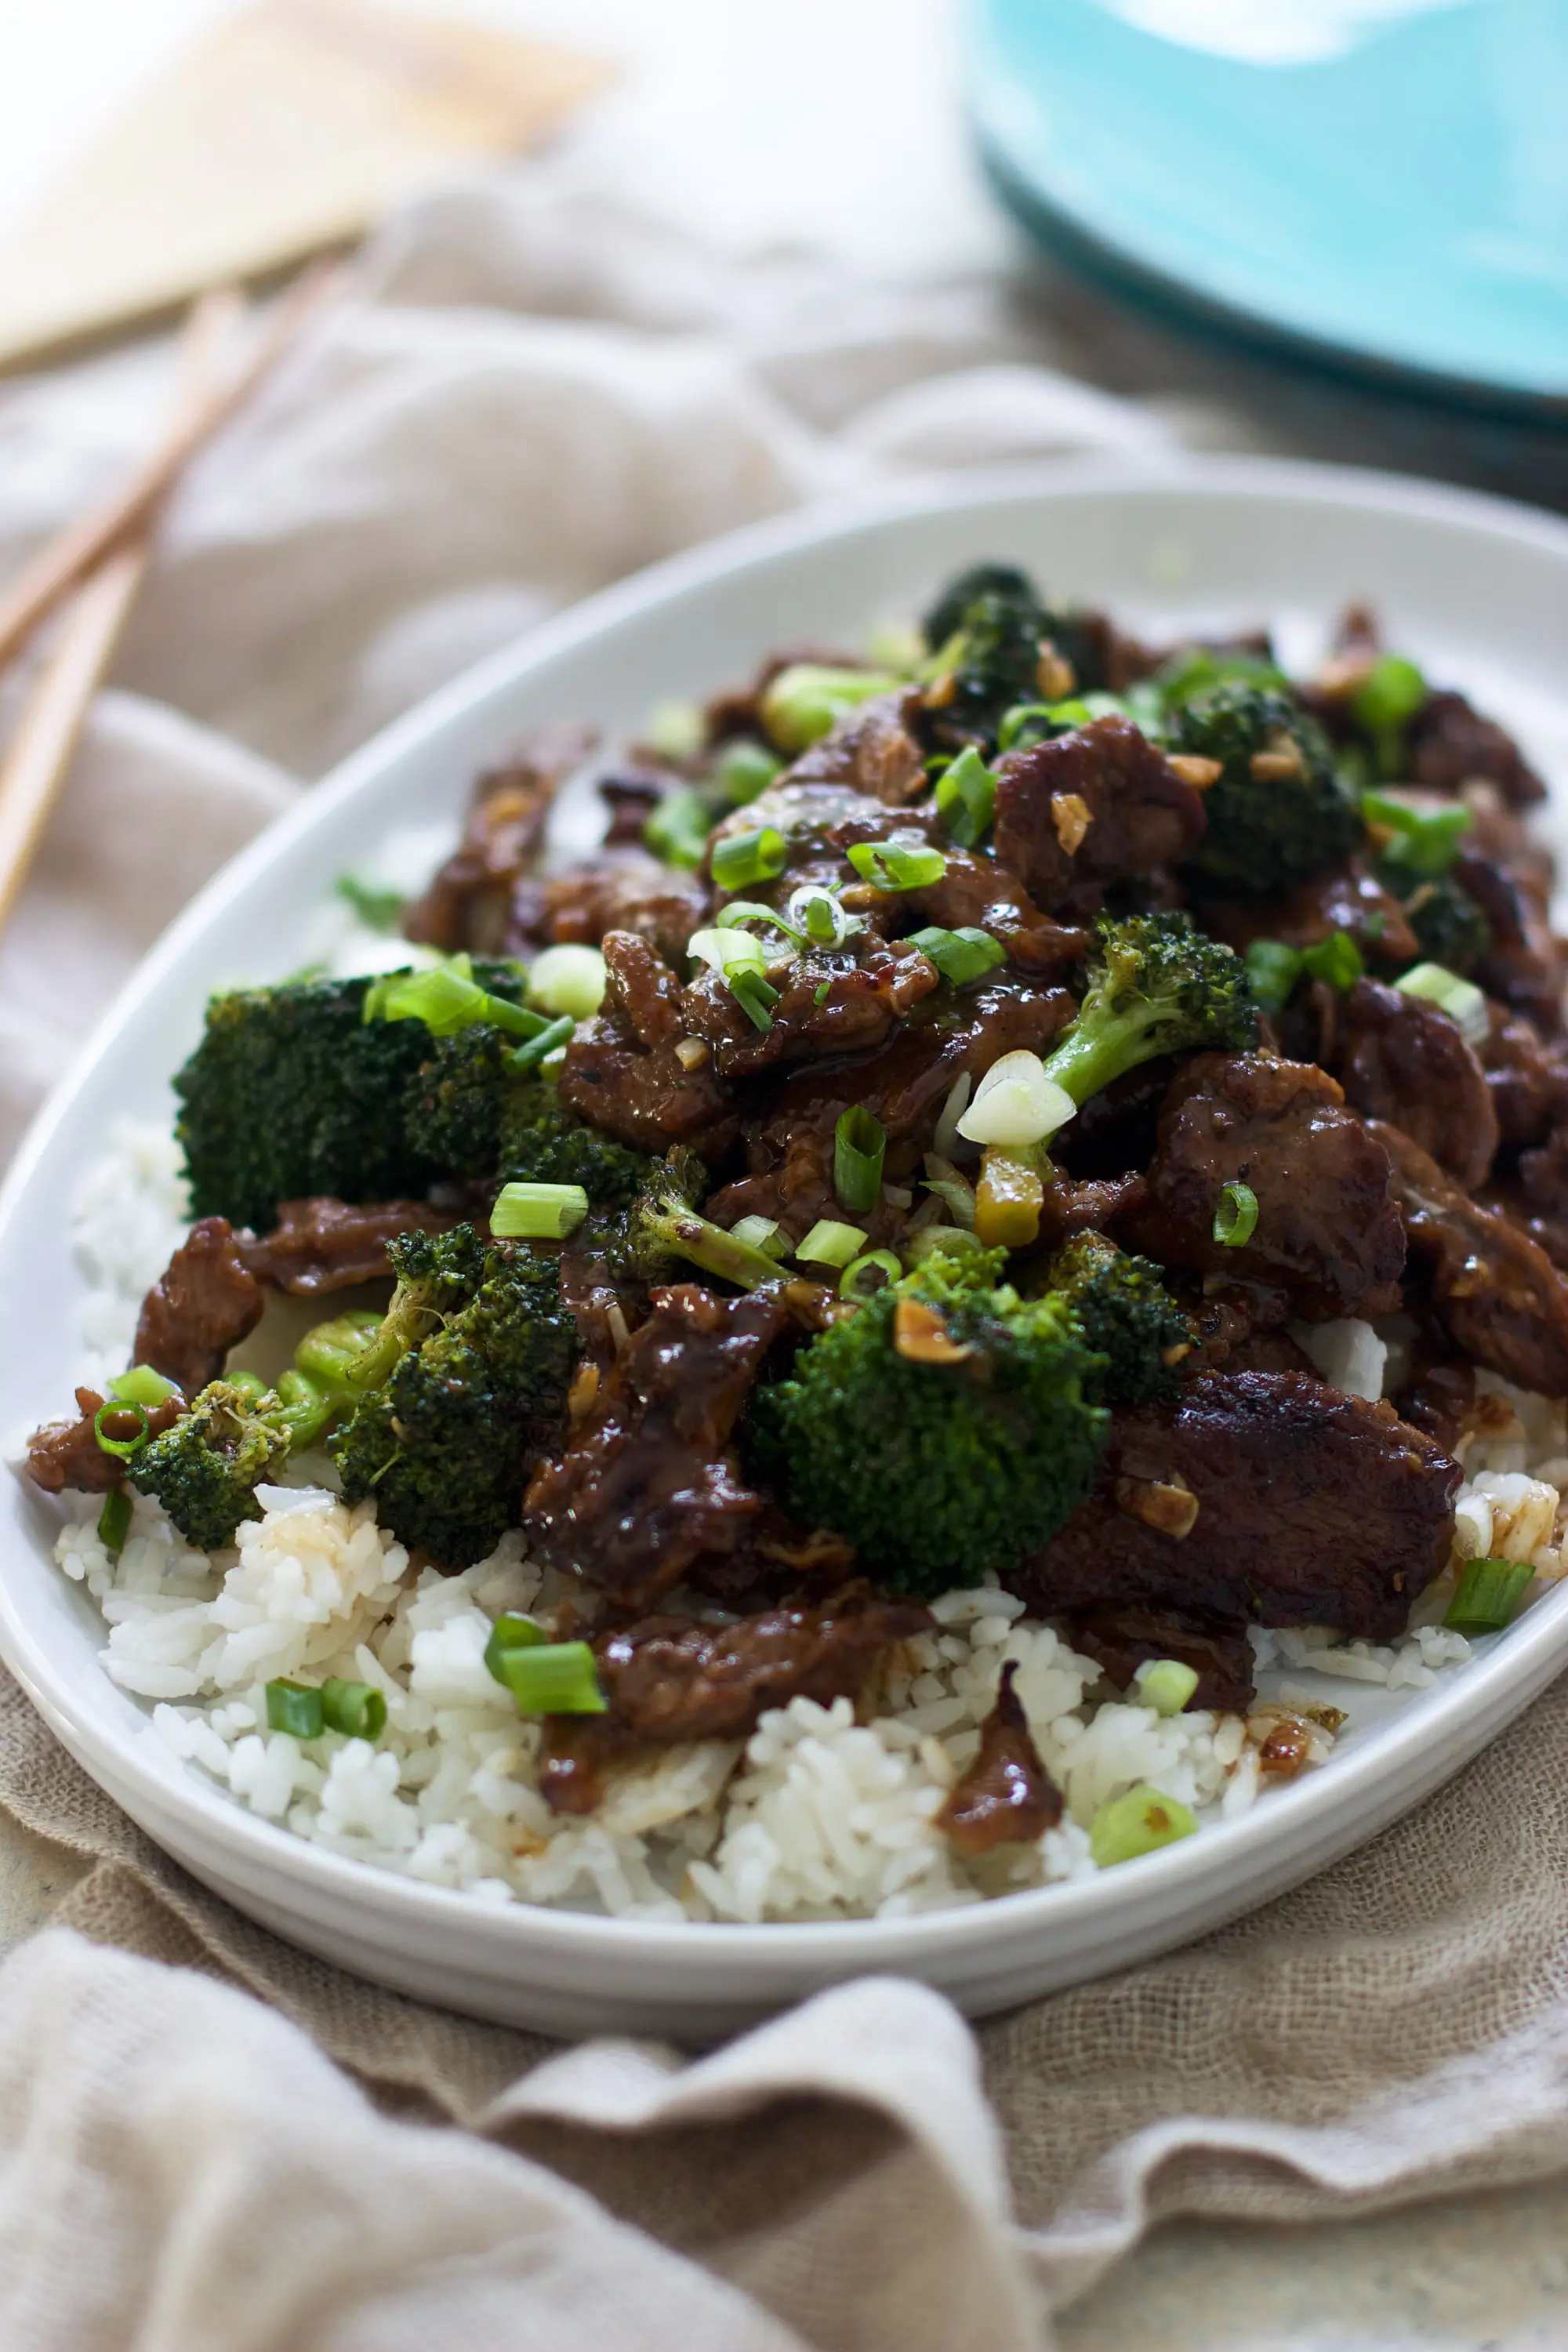 Easy Beef with Broccoli - Comes together in under 30 minutes, is lightened-up and SO much better than takeout!